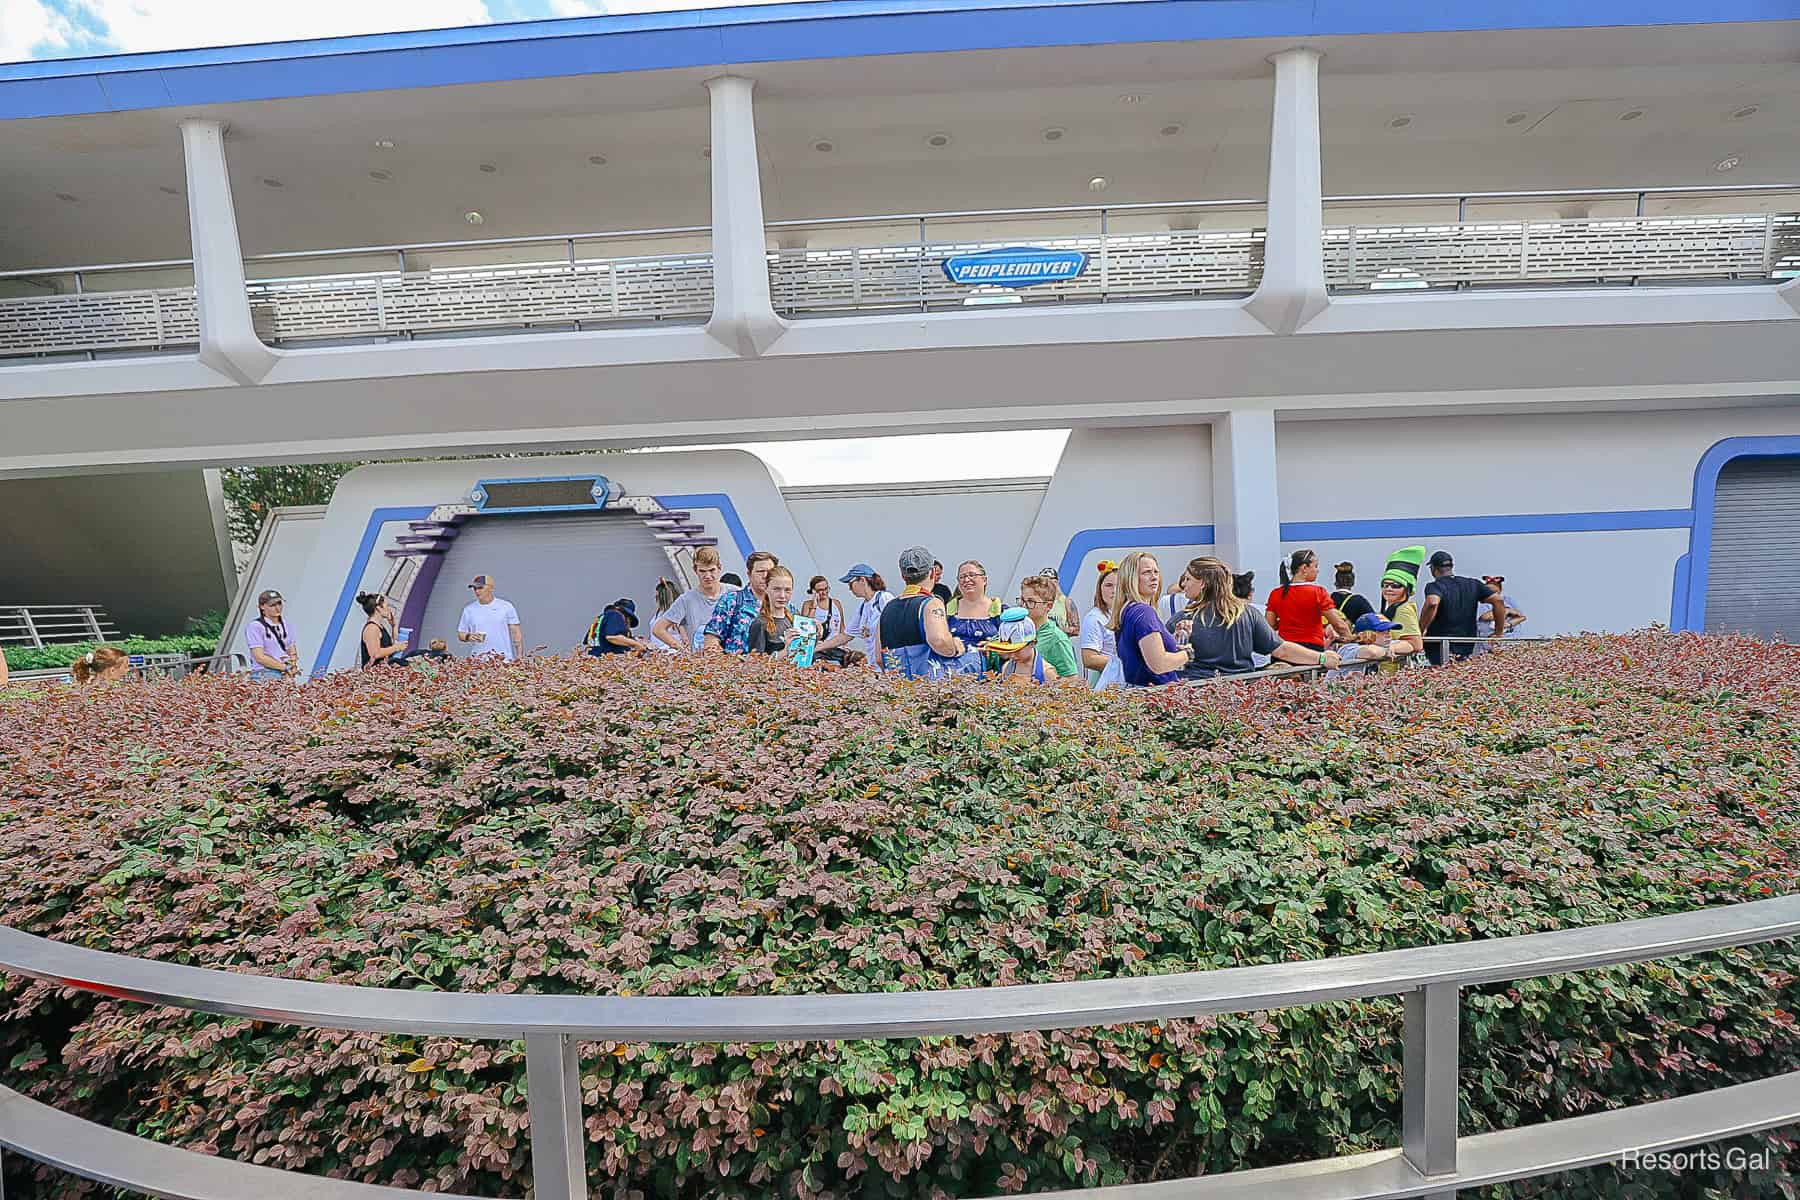 guests waiting to meet Stitch in Tomorrowland at Magic Kingdom